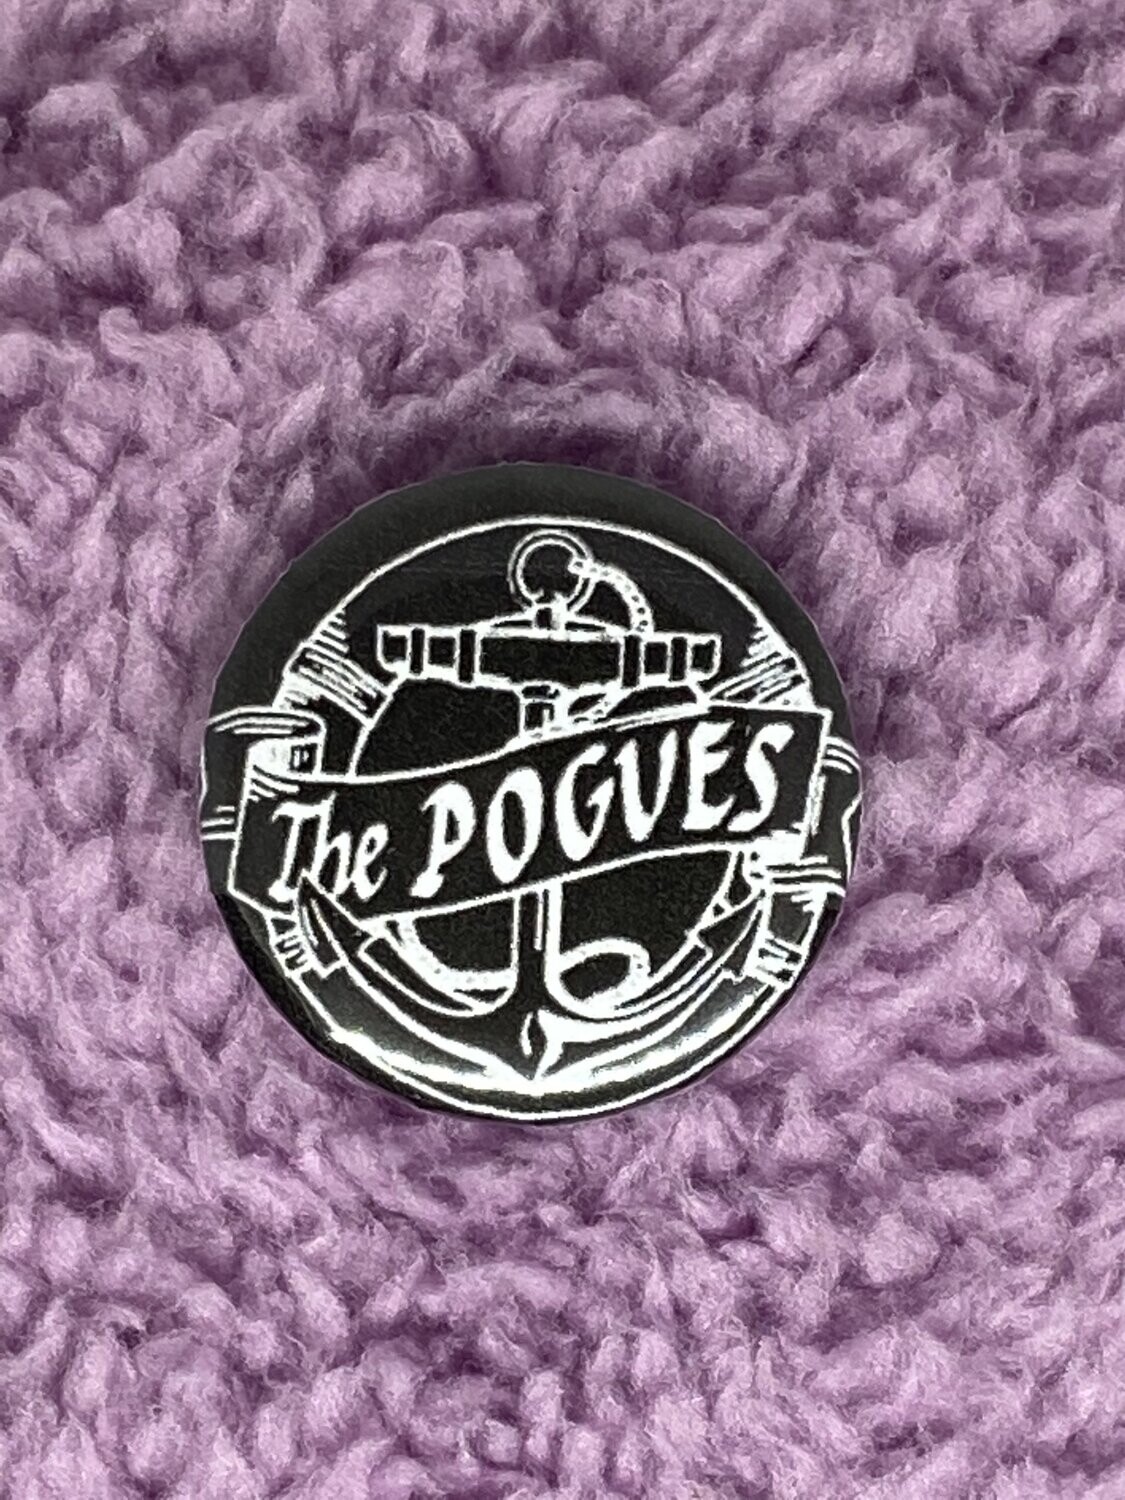 The Pogues Badge